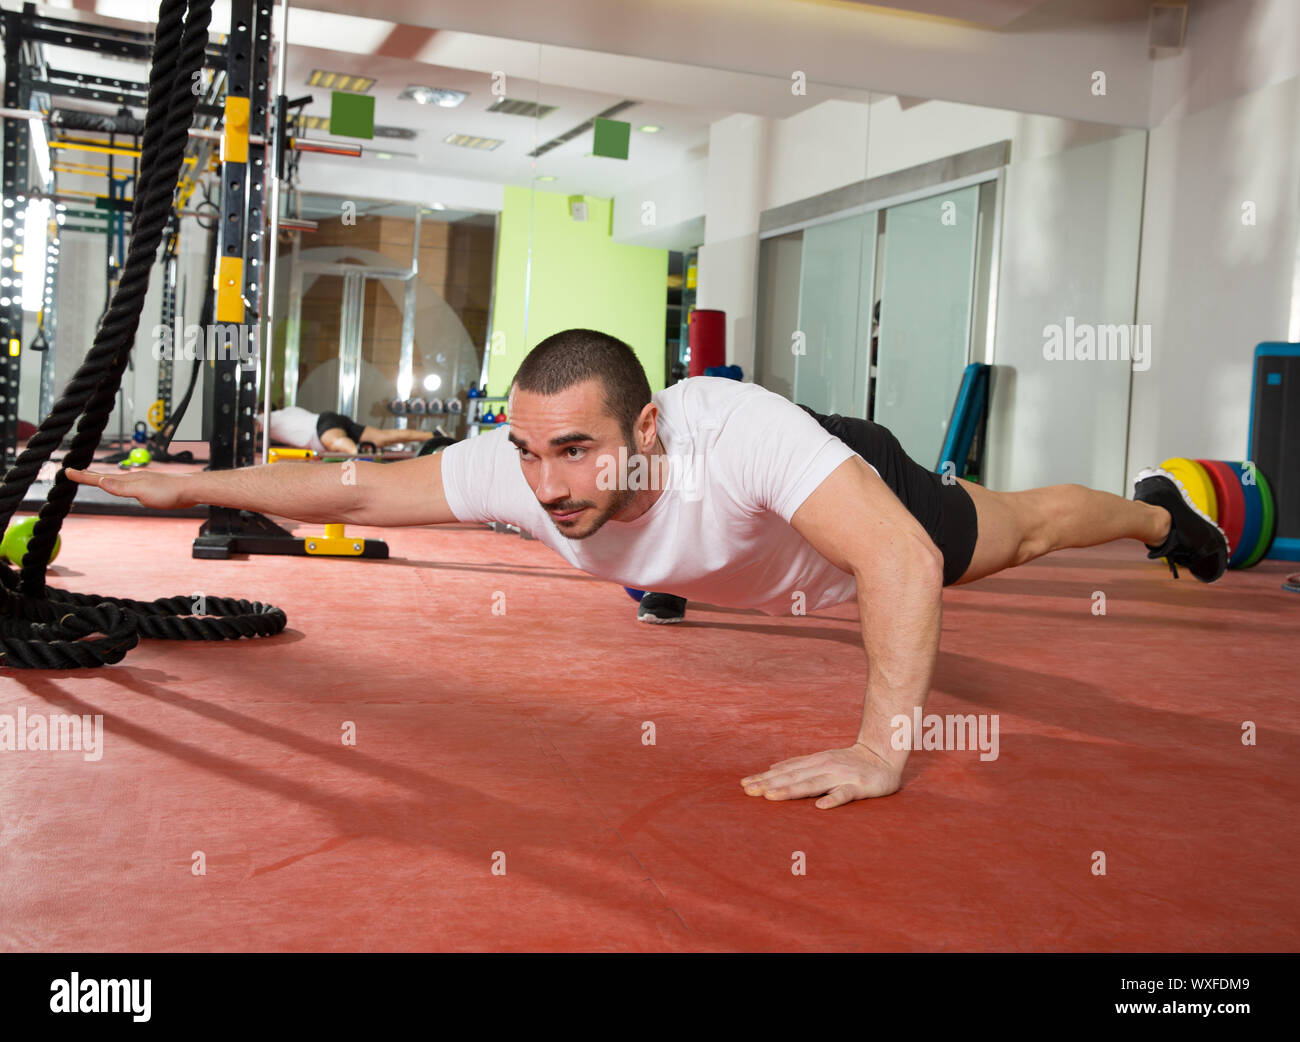 Crossfit fitness man balance push ups with one leg and arm up exercise at gym workout Stock Photo